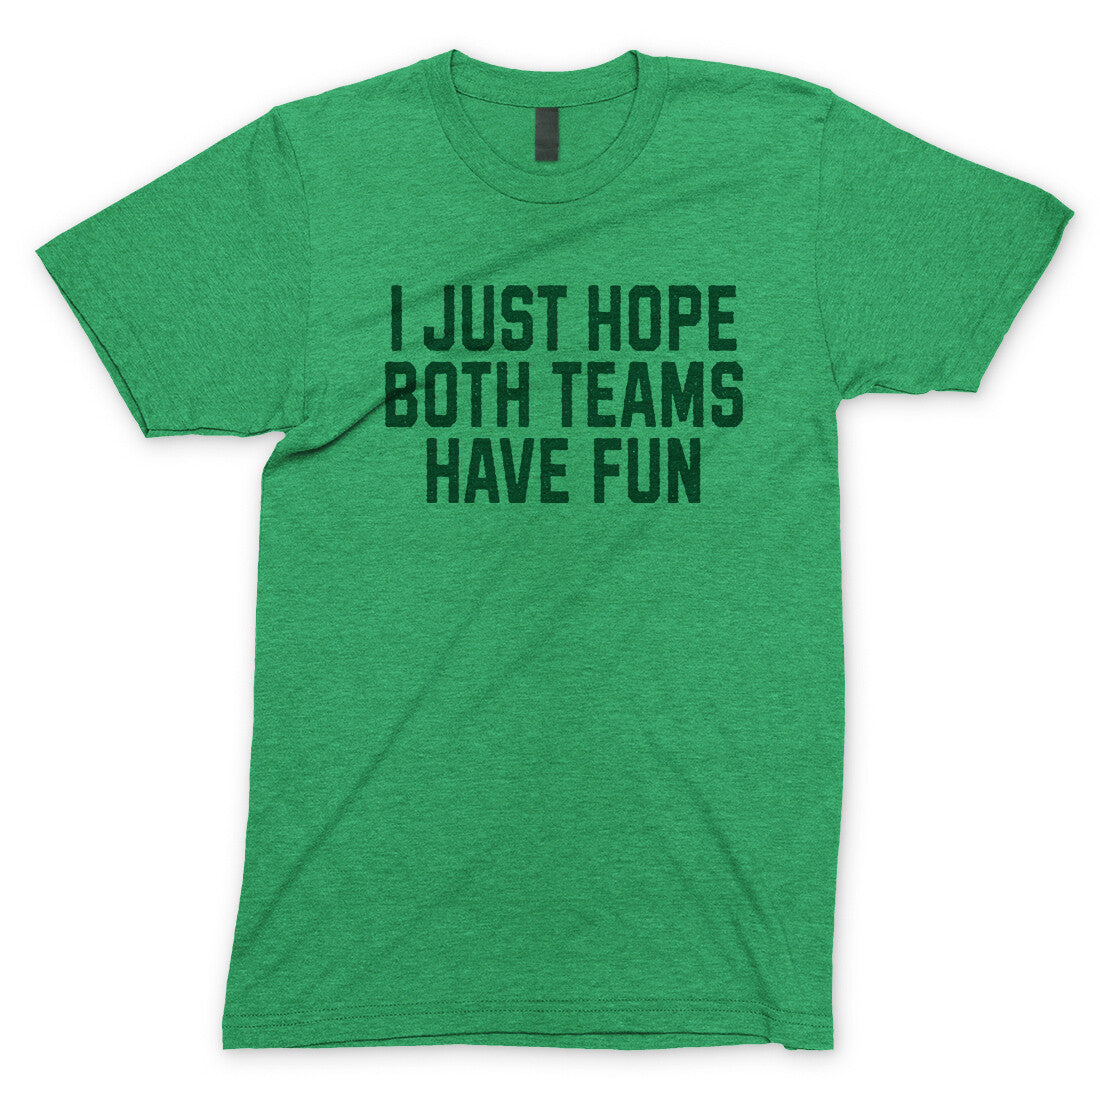 I Just Hope Both Teams Have Fun in Heather Irish Green Color